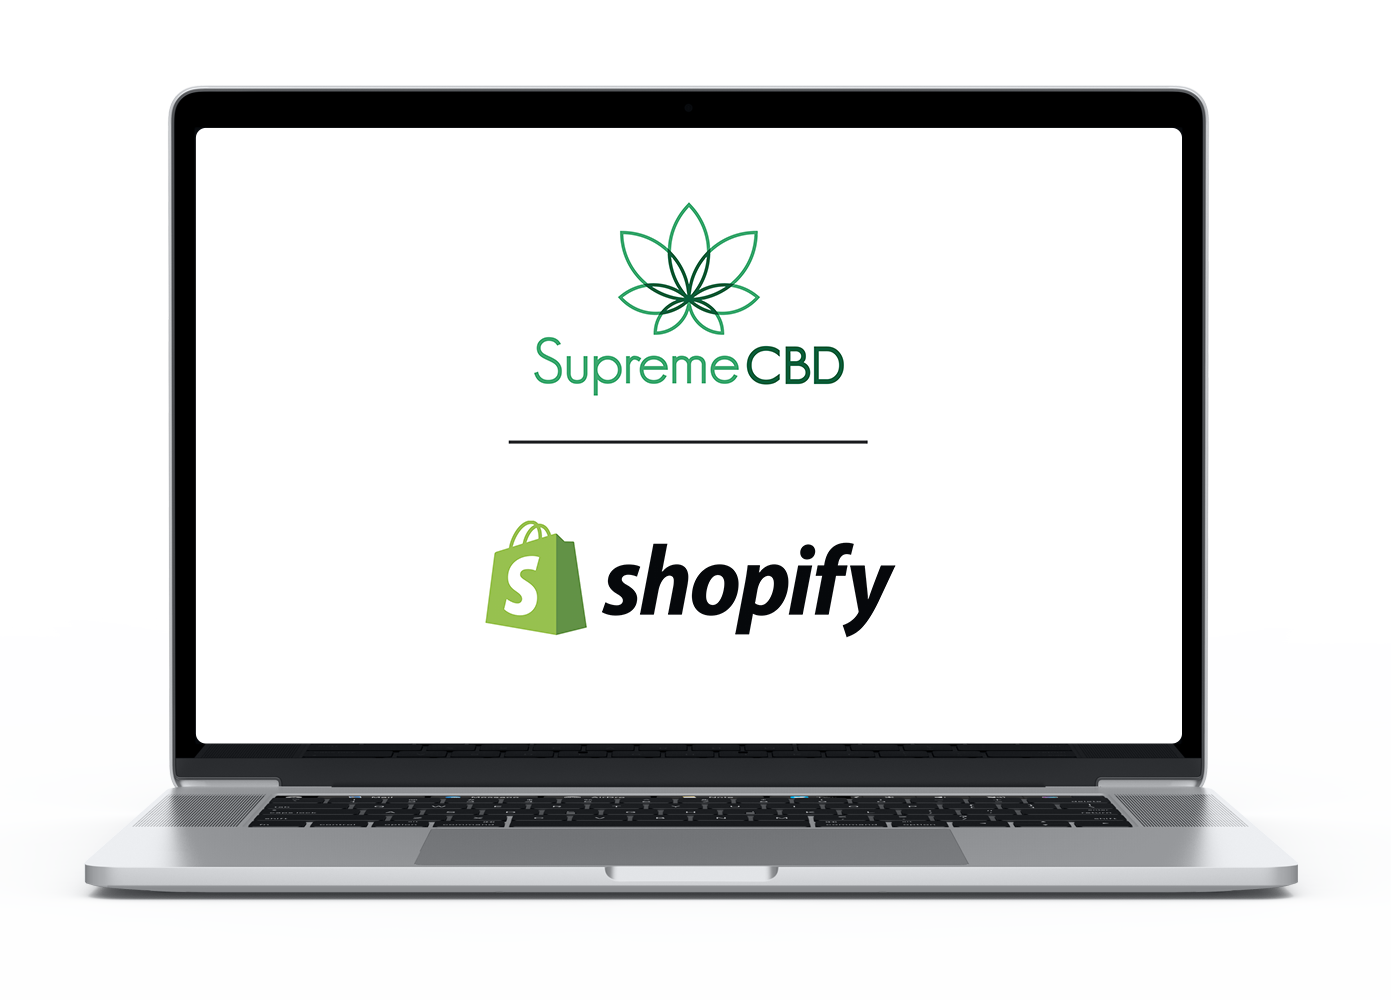 Mockup of a laptop with the Supreme CBD and Shopify logos